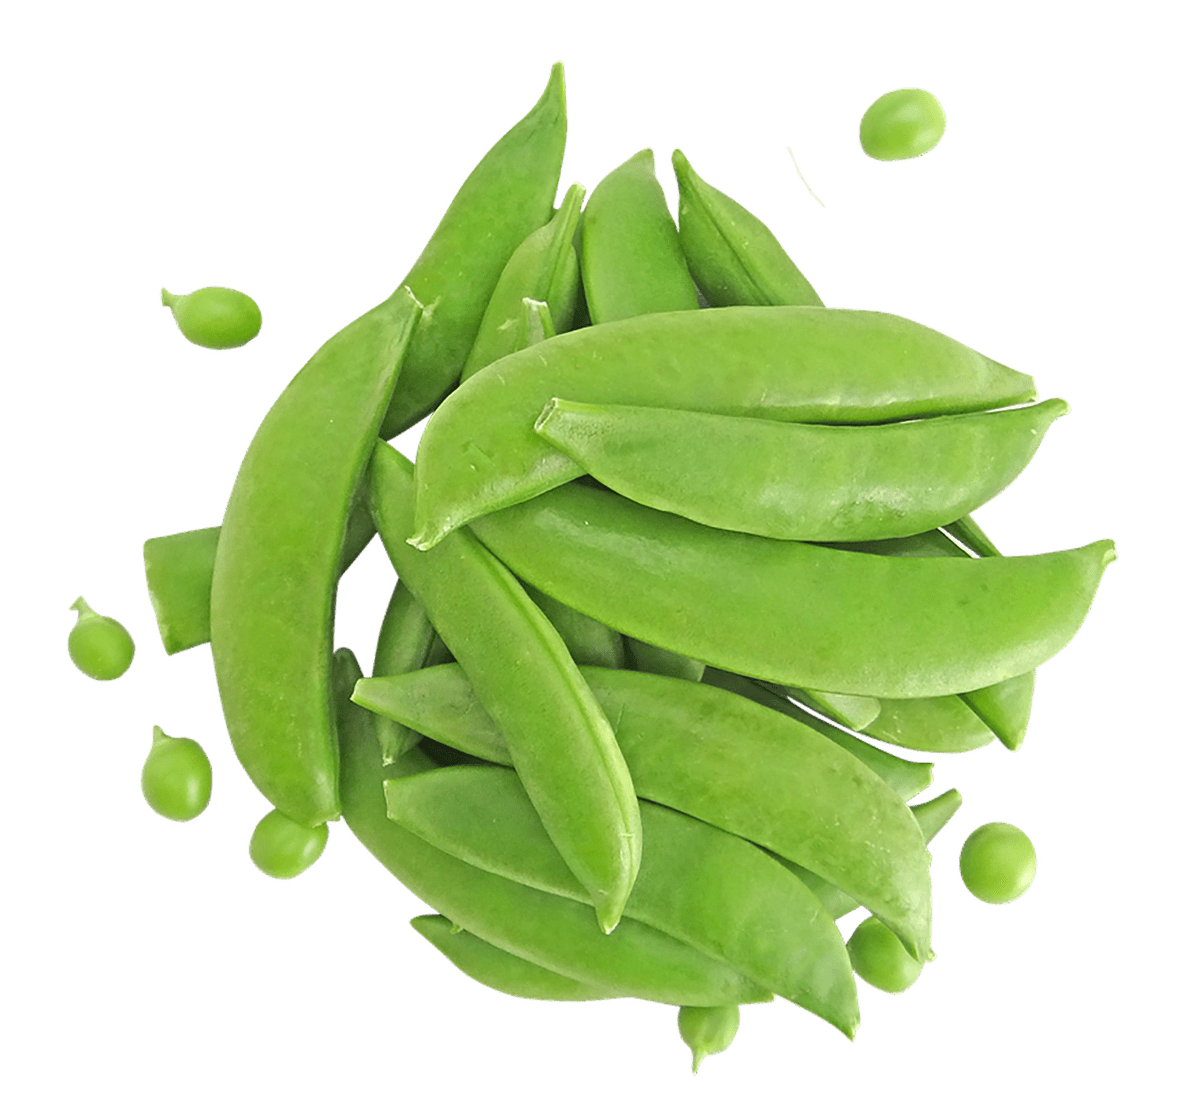 A pile of green peas on a white background with a few other loose peas surrounding them.